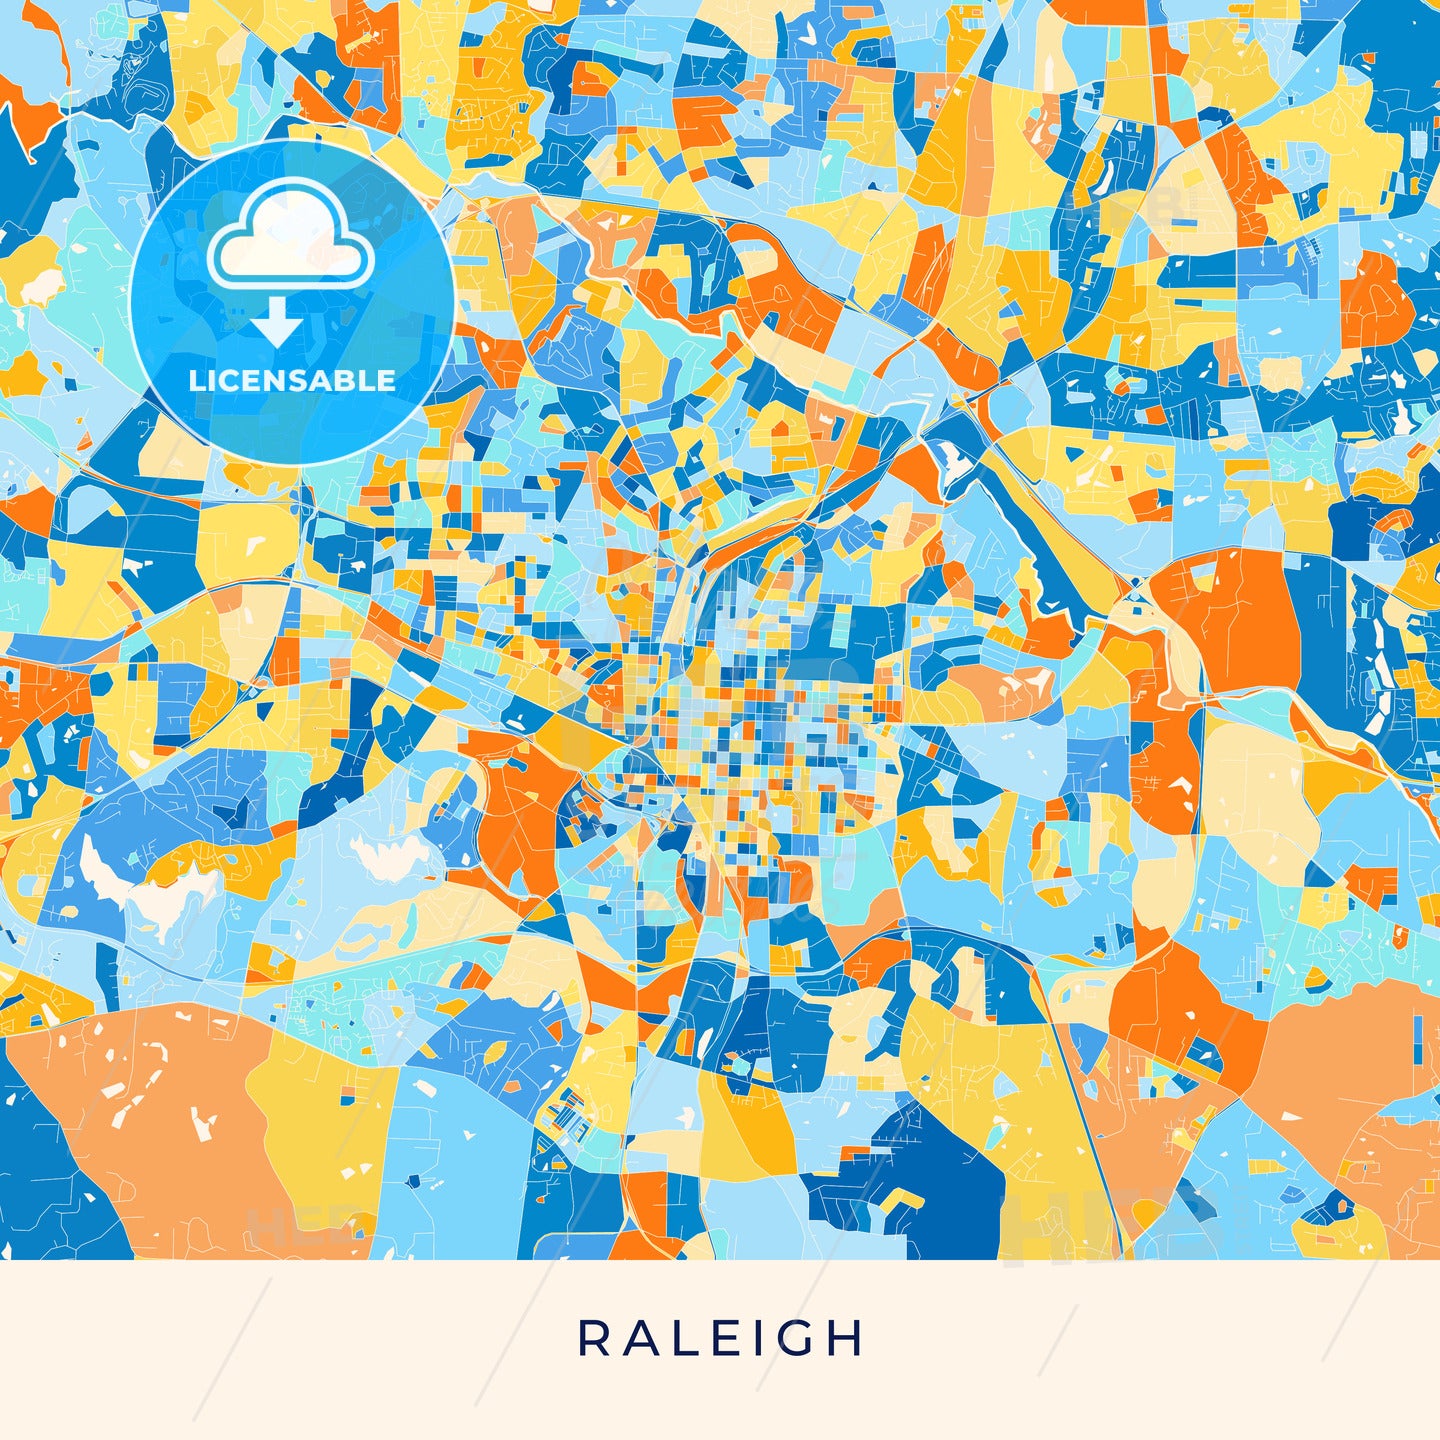 Raleigh colorful map poster template